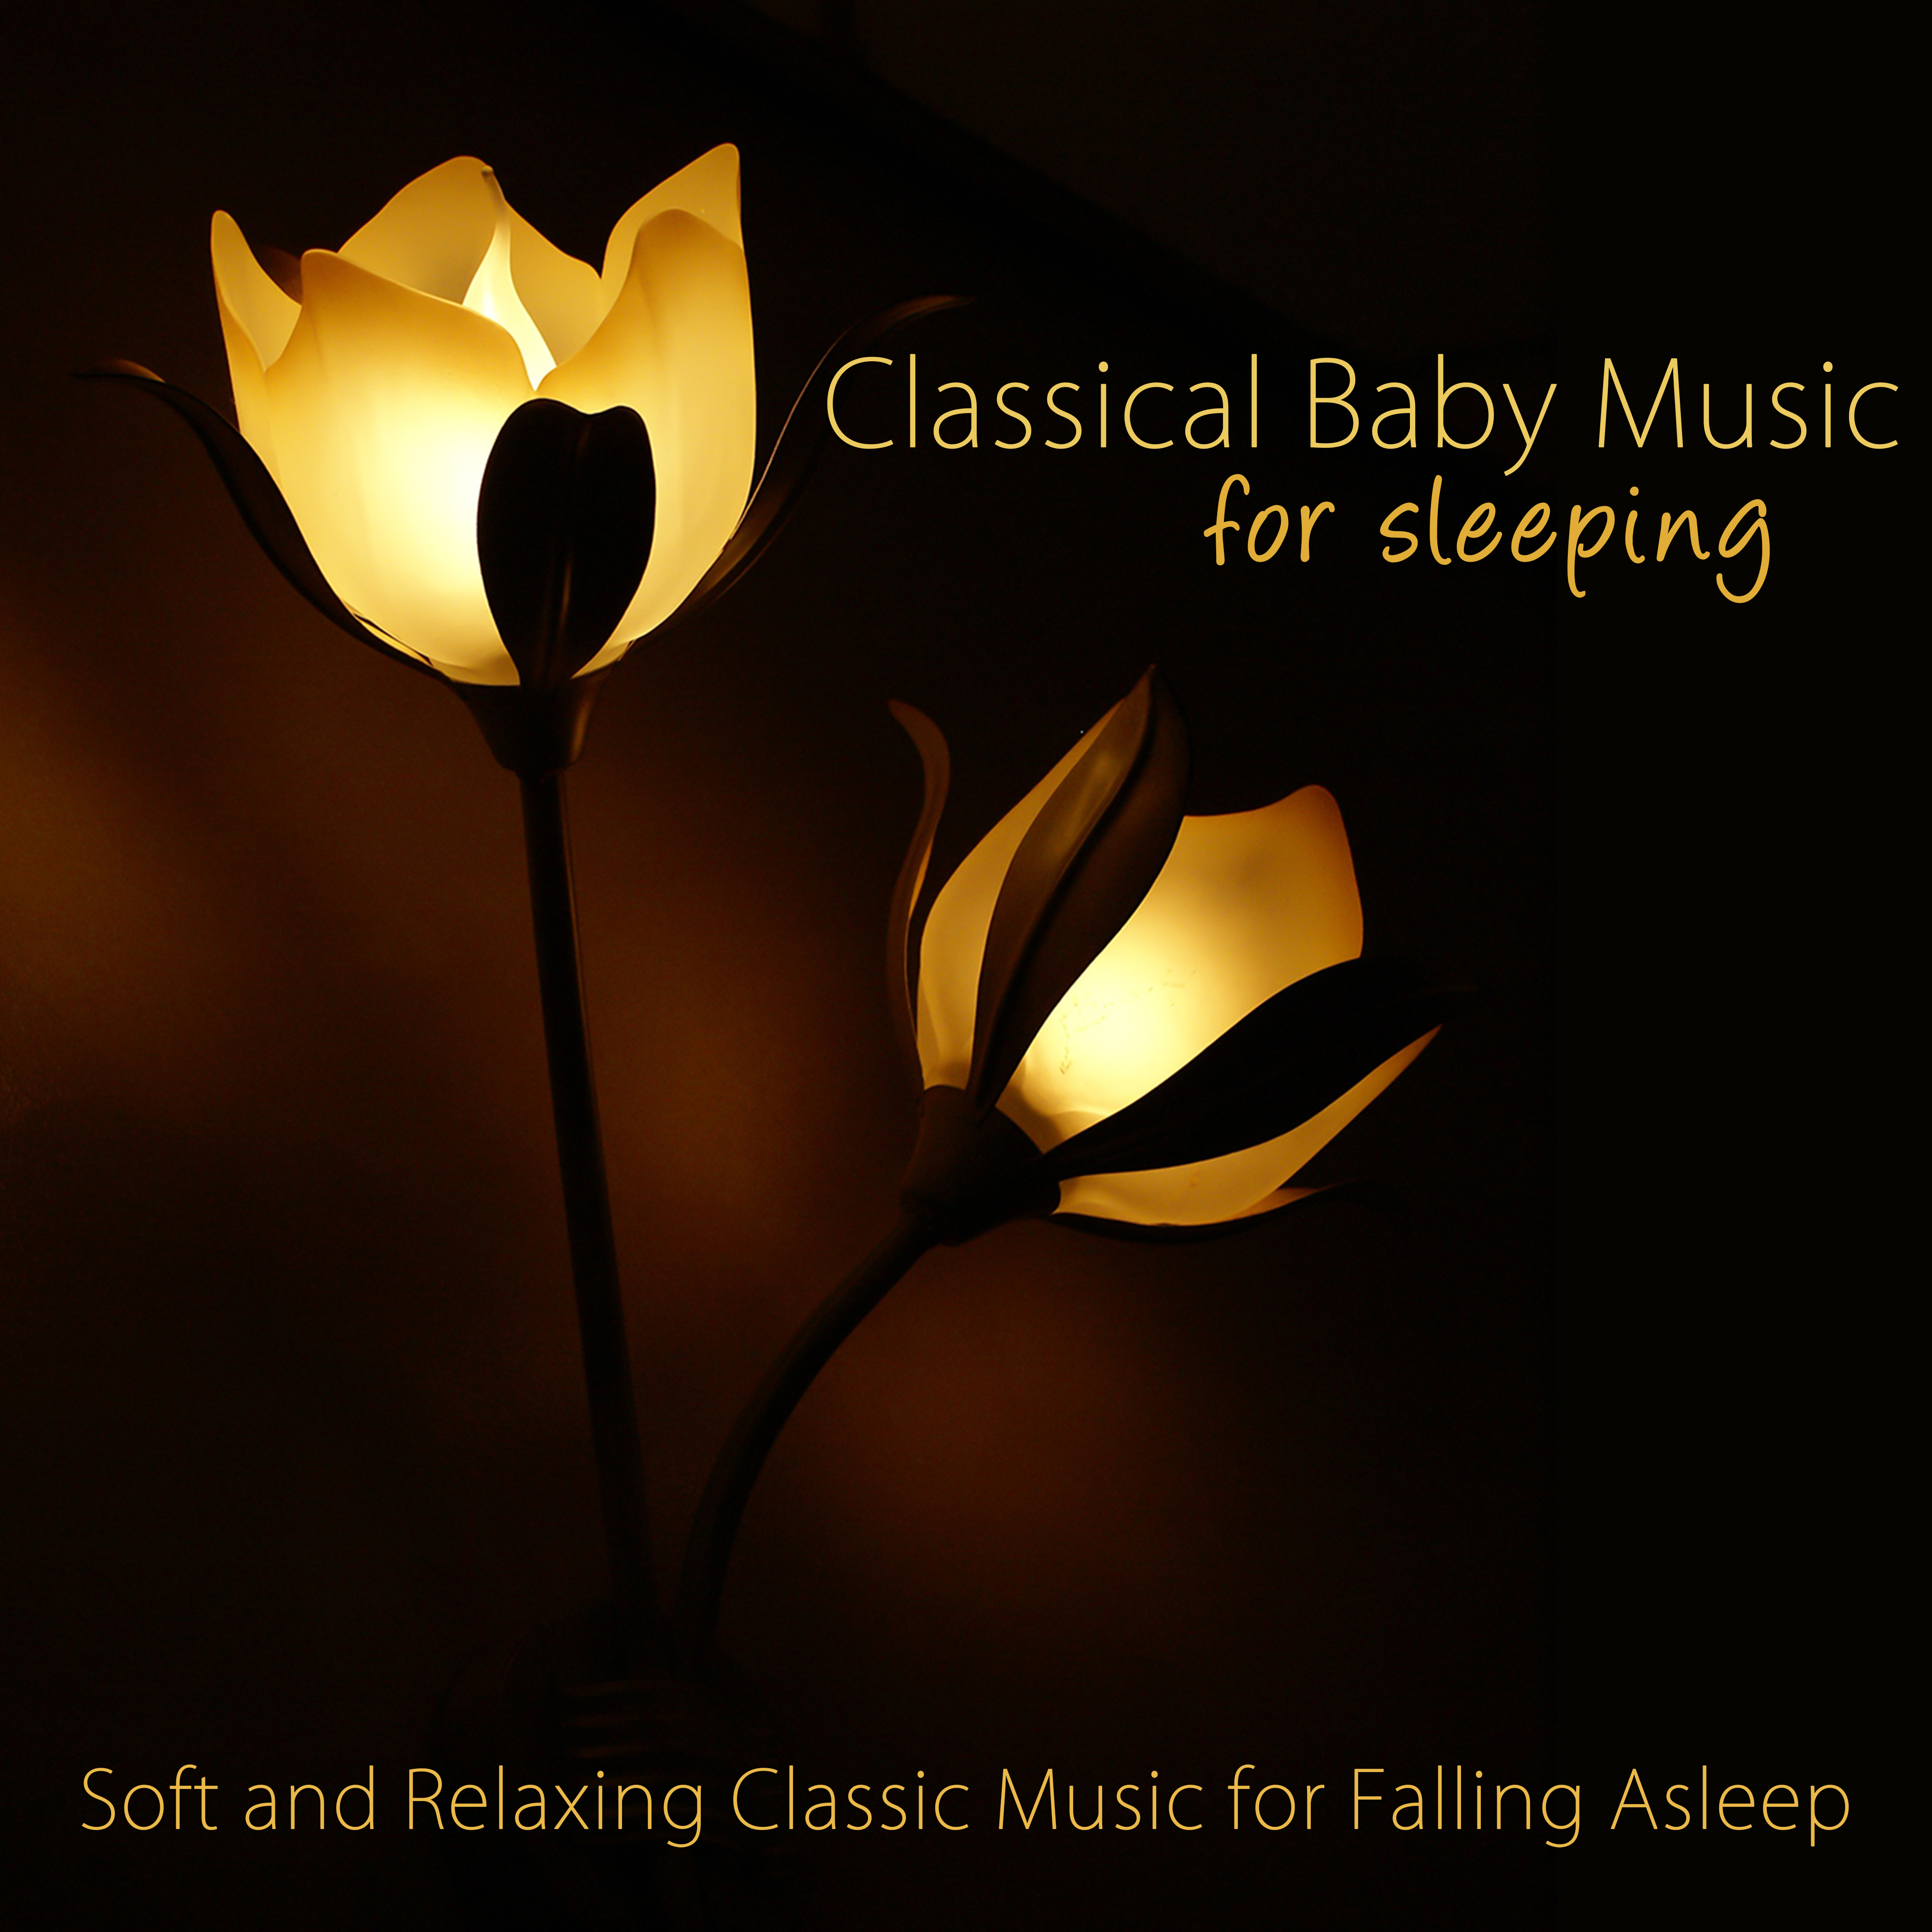 Classical Baby Music for Sleeping - Soft and Relaxing Classic Music for Falling Asleep, Sedation, Stress Relief, Relaxation & Deep Sleep, Lullabies for Baby Sleep